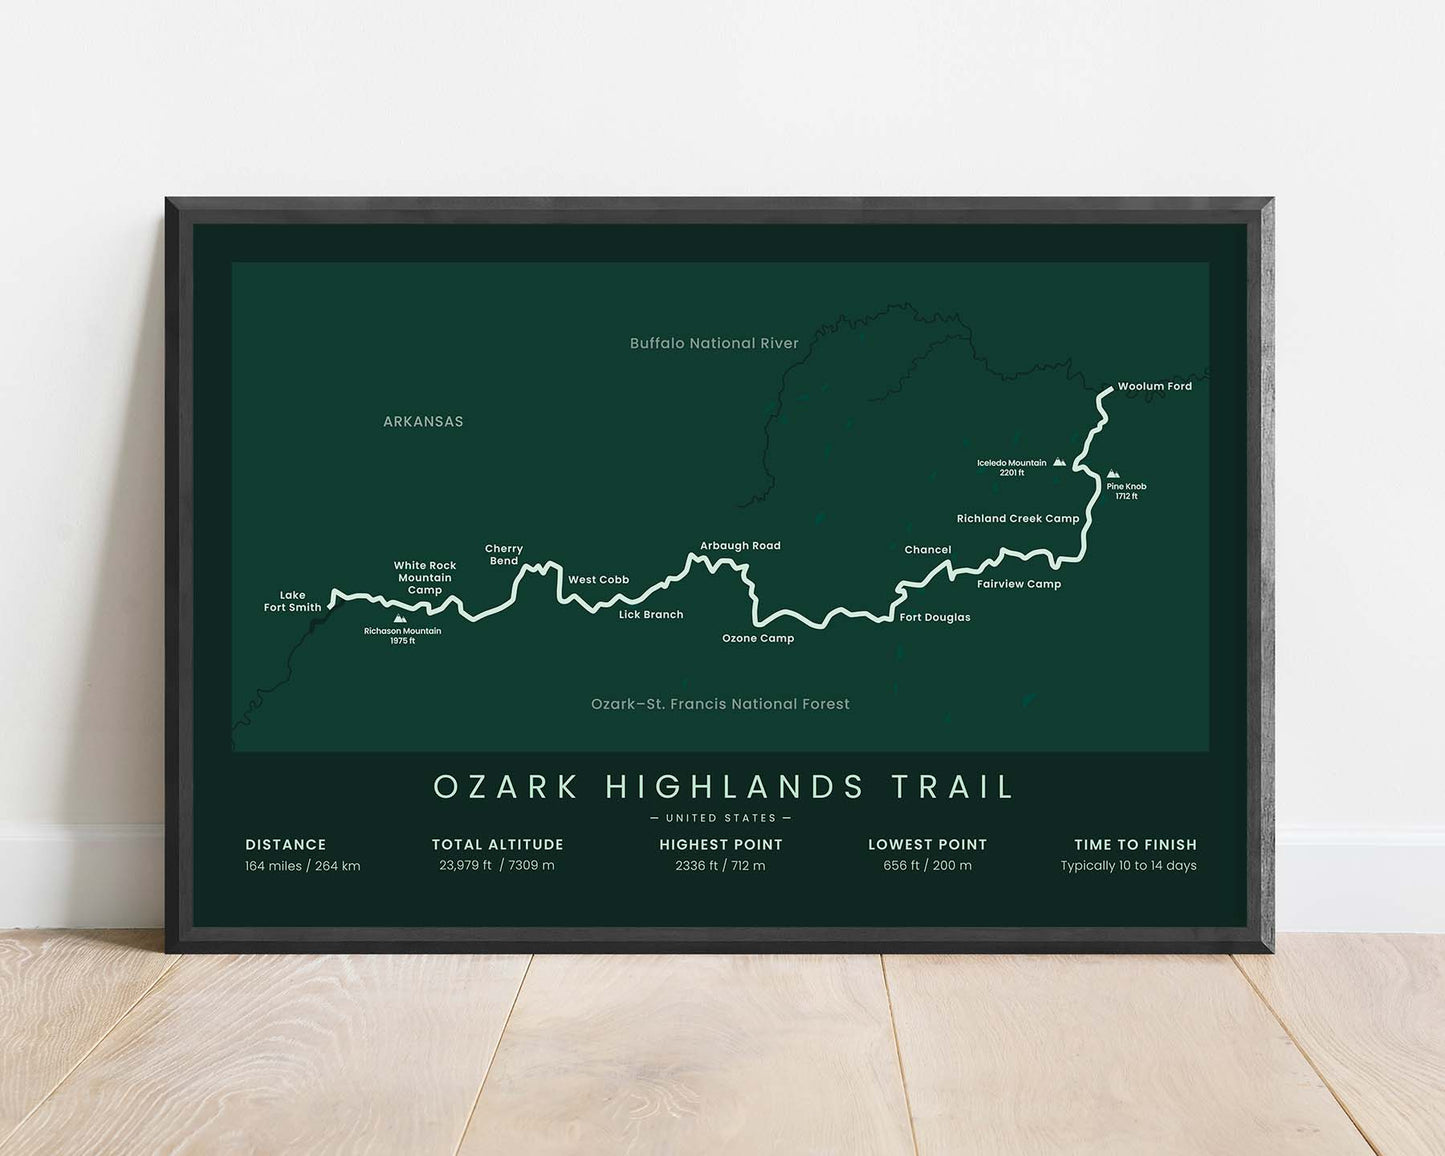 Ozark Highlands National Recreation Trail (Arkansas, Ozark National Forest, United States, Lake Fort Smith State Park to Buffalo National River, Lake Fort Smith to Woolum Ford) Track Map Art with Green Background